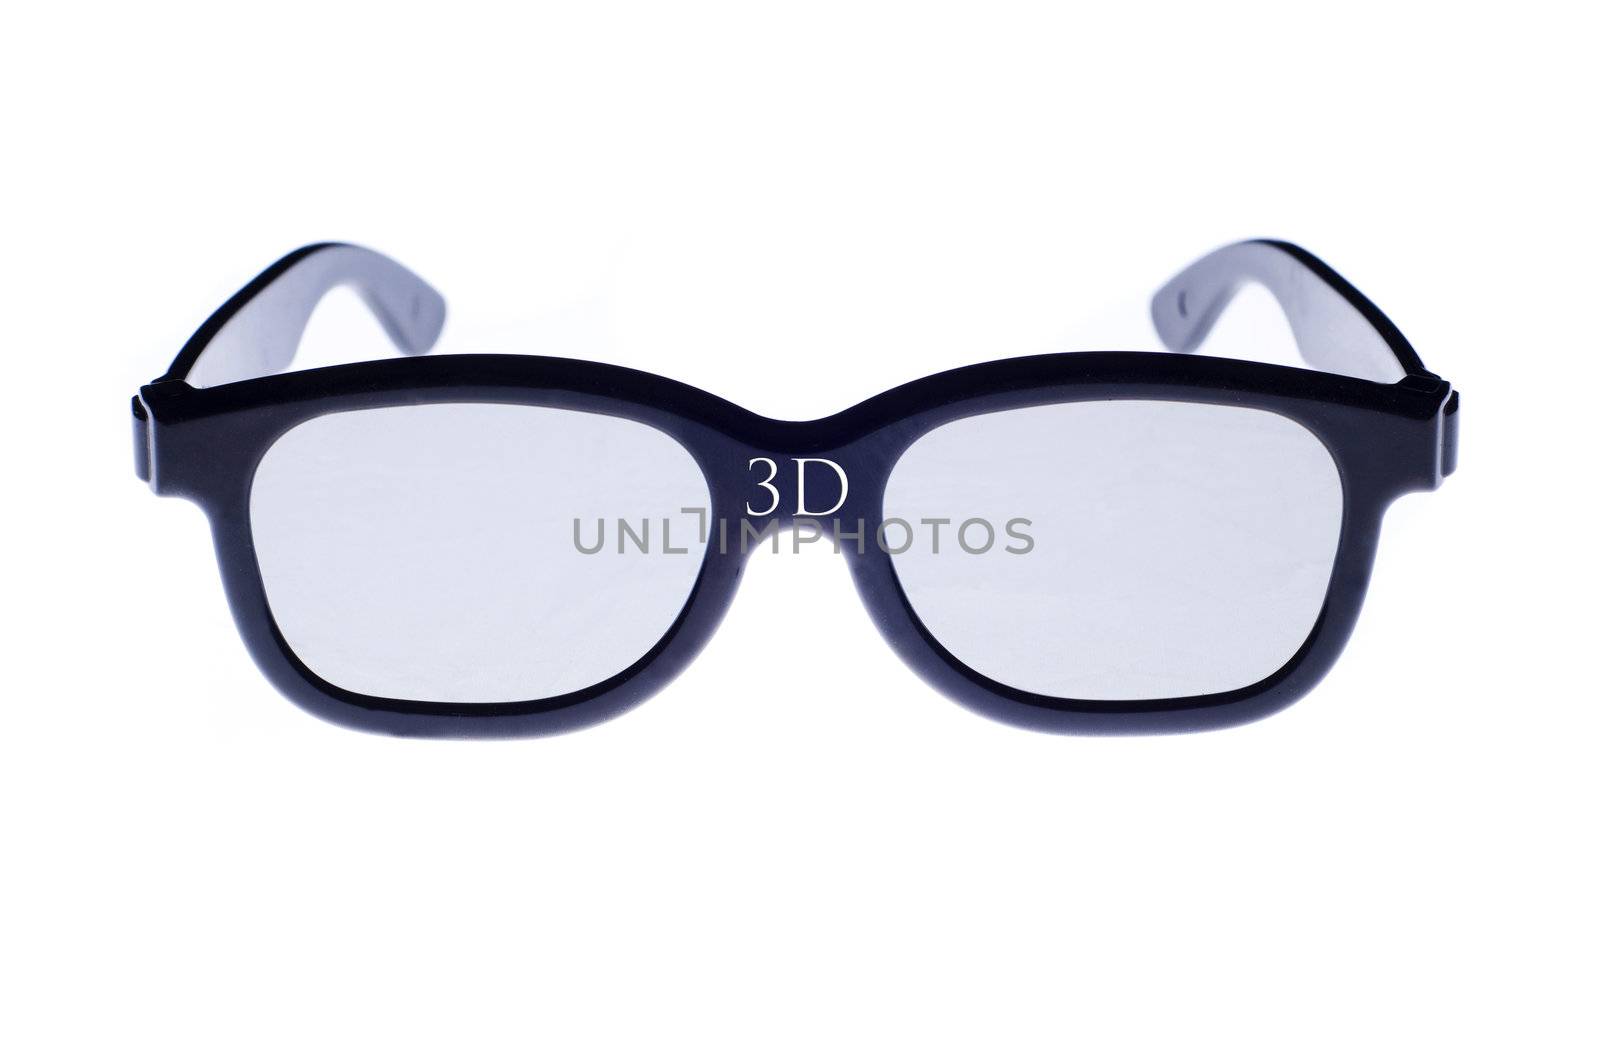 3d glasses by PDImages